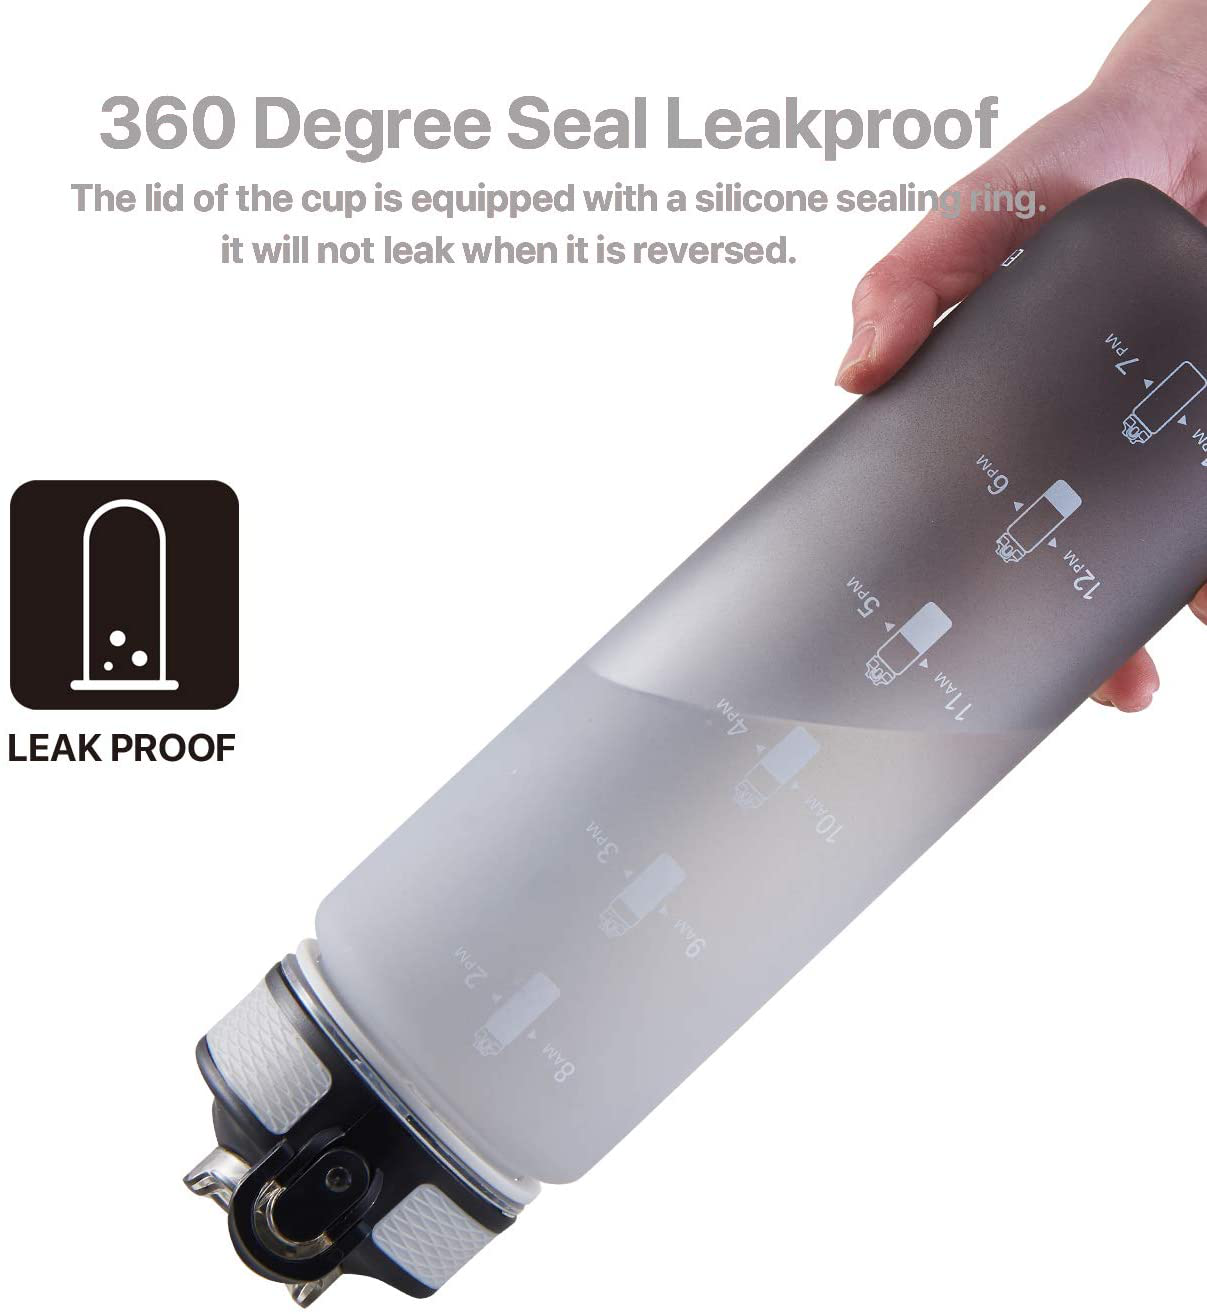 2L Portable Large-Capacity Water Bottle Time Marker Leak-Proof BPA Fro –  Deal or Shop